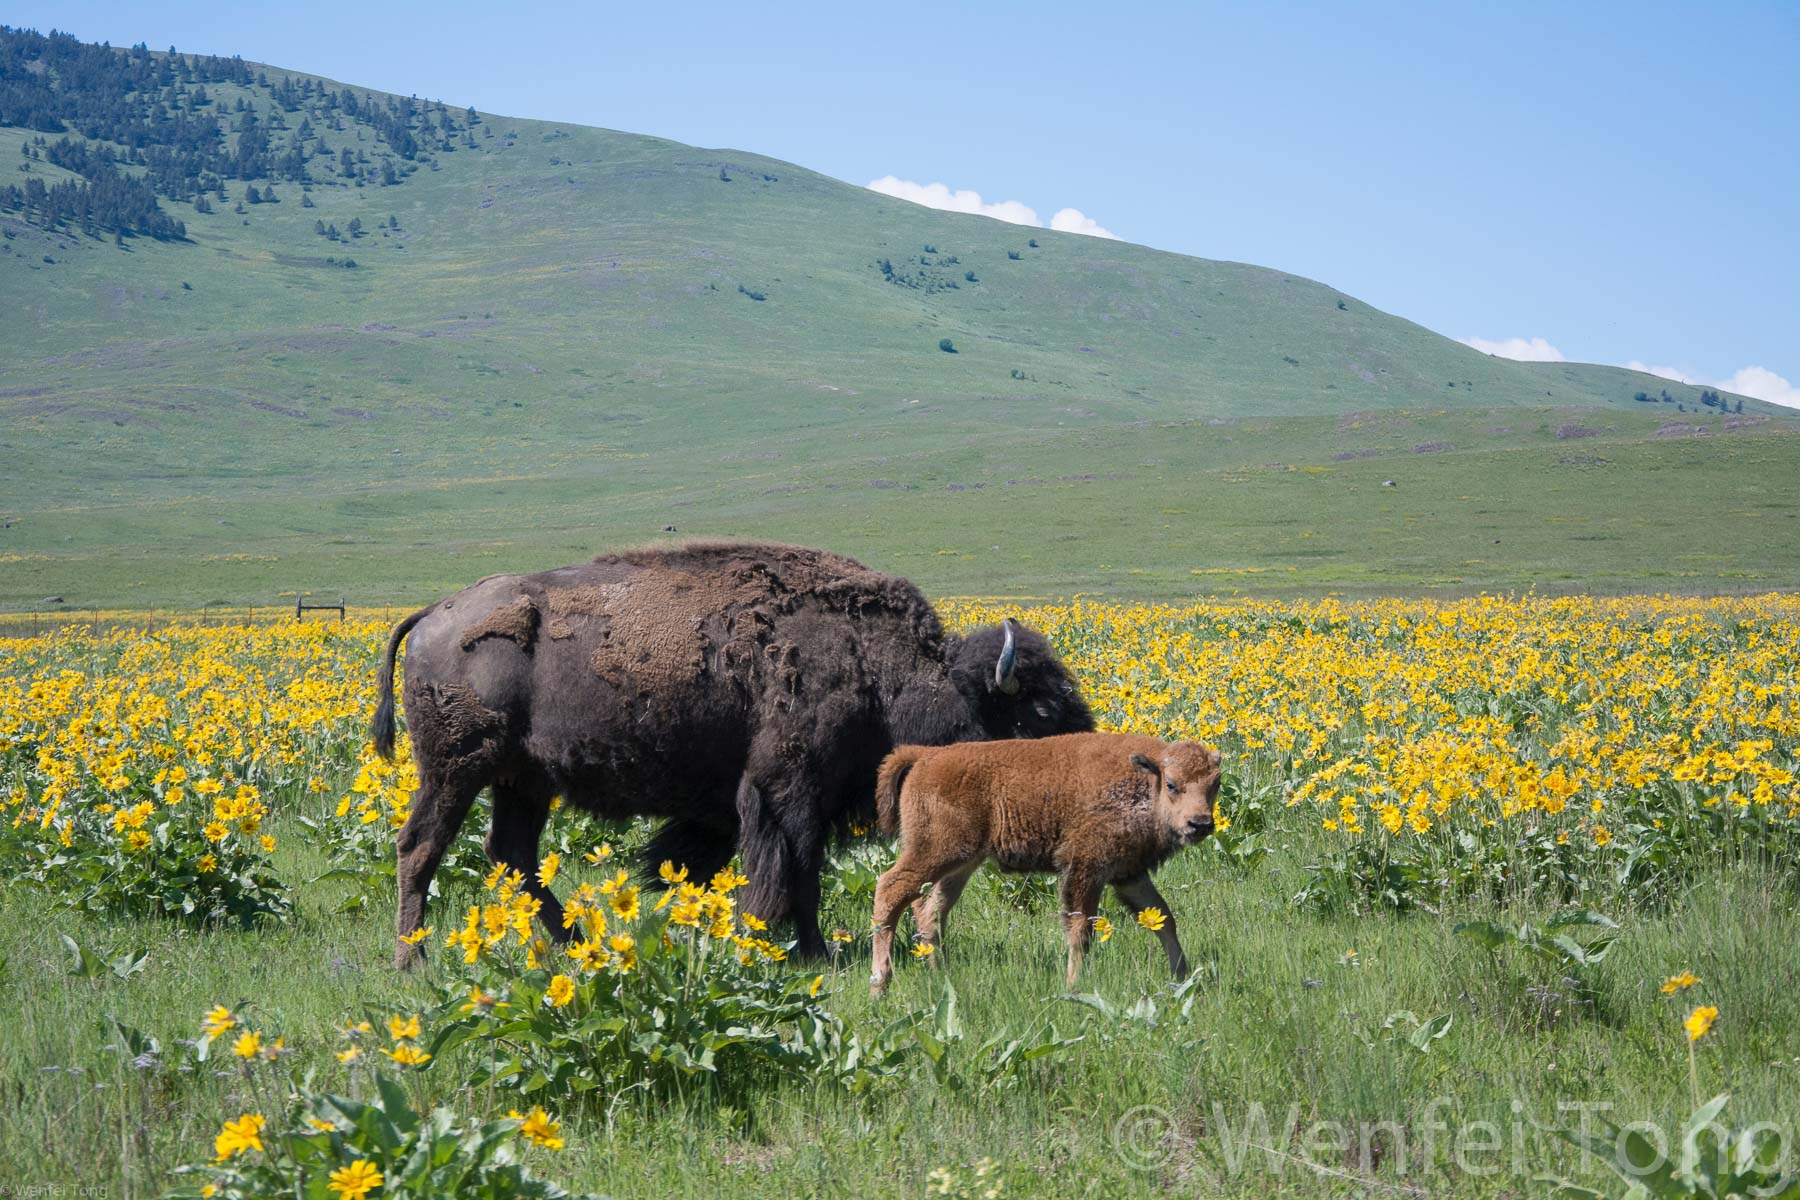 Bison cow and calf among the arrowleaf balsamroot